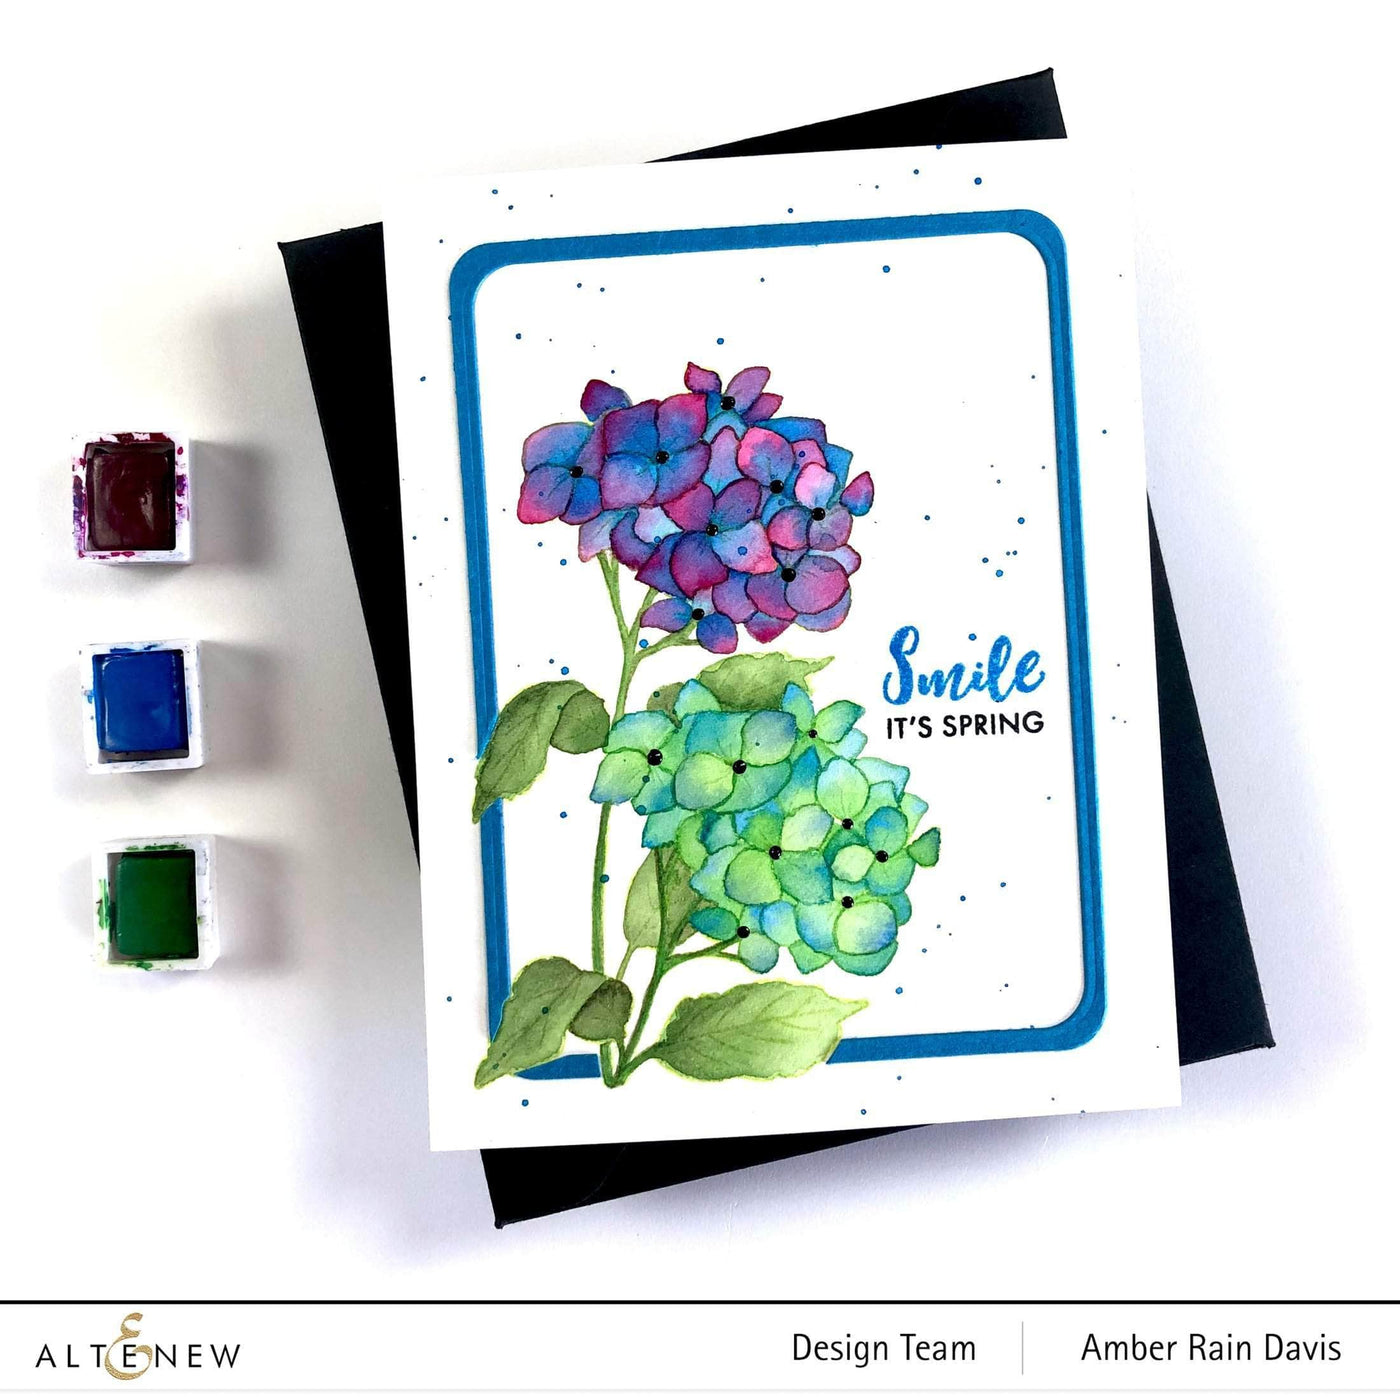 Clear Stamps Paint-A-Flower: Hydrangea Outline Stamp Set